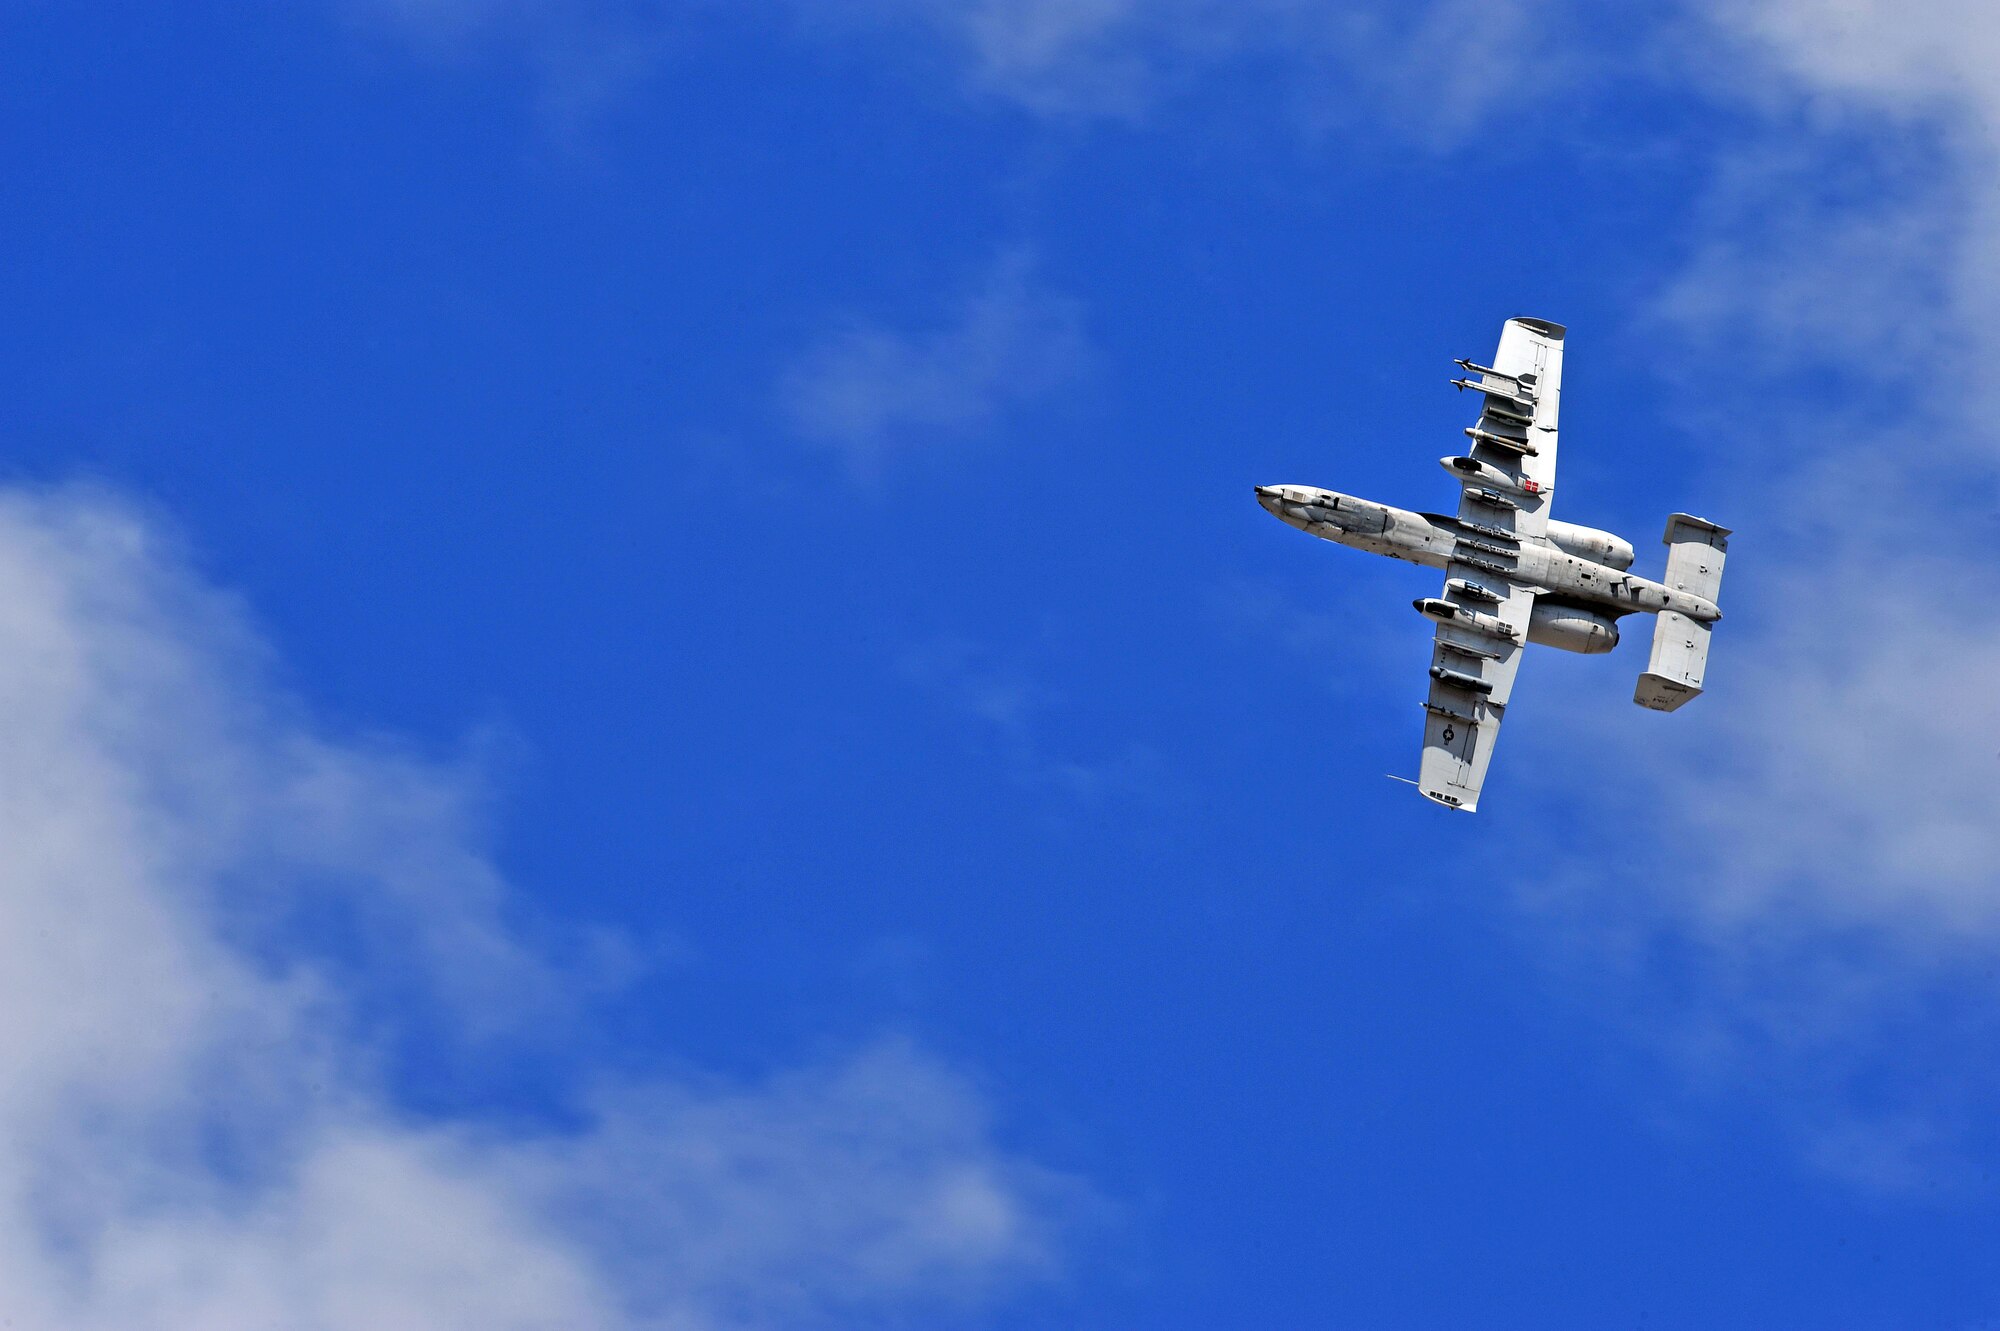 An A-10 Thunderbolt departs for a training mission at Davis-Monthan Air Force Base, Ariz., March 27, 2014.  The first production A-10A was delivered to Davis-Monthan Air Force Base, Ariz., in October 1975. (U.S. Air Force photo by Senior Airman Josh Slavin/Released)